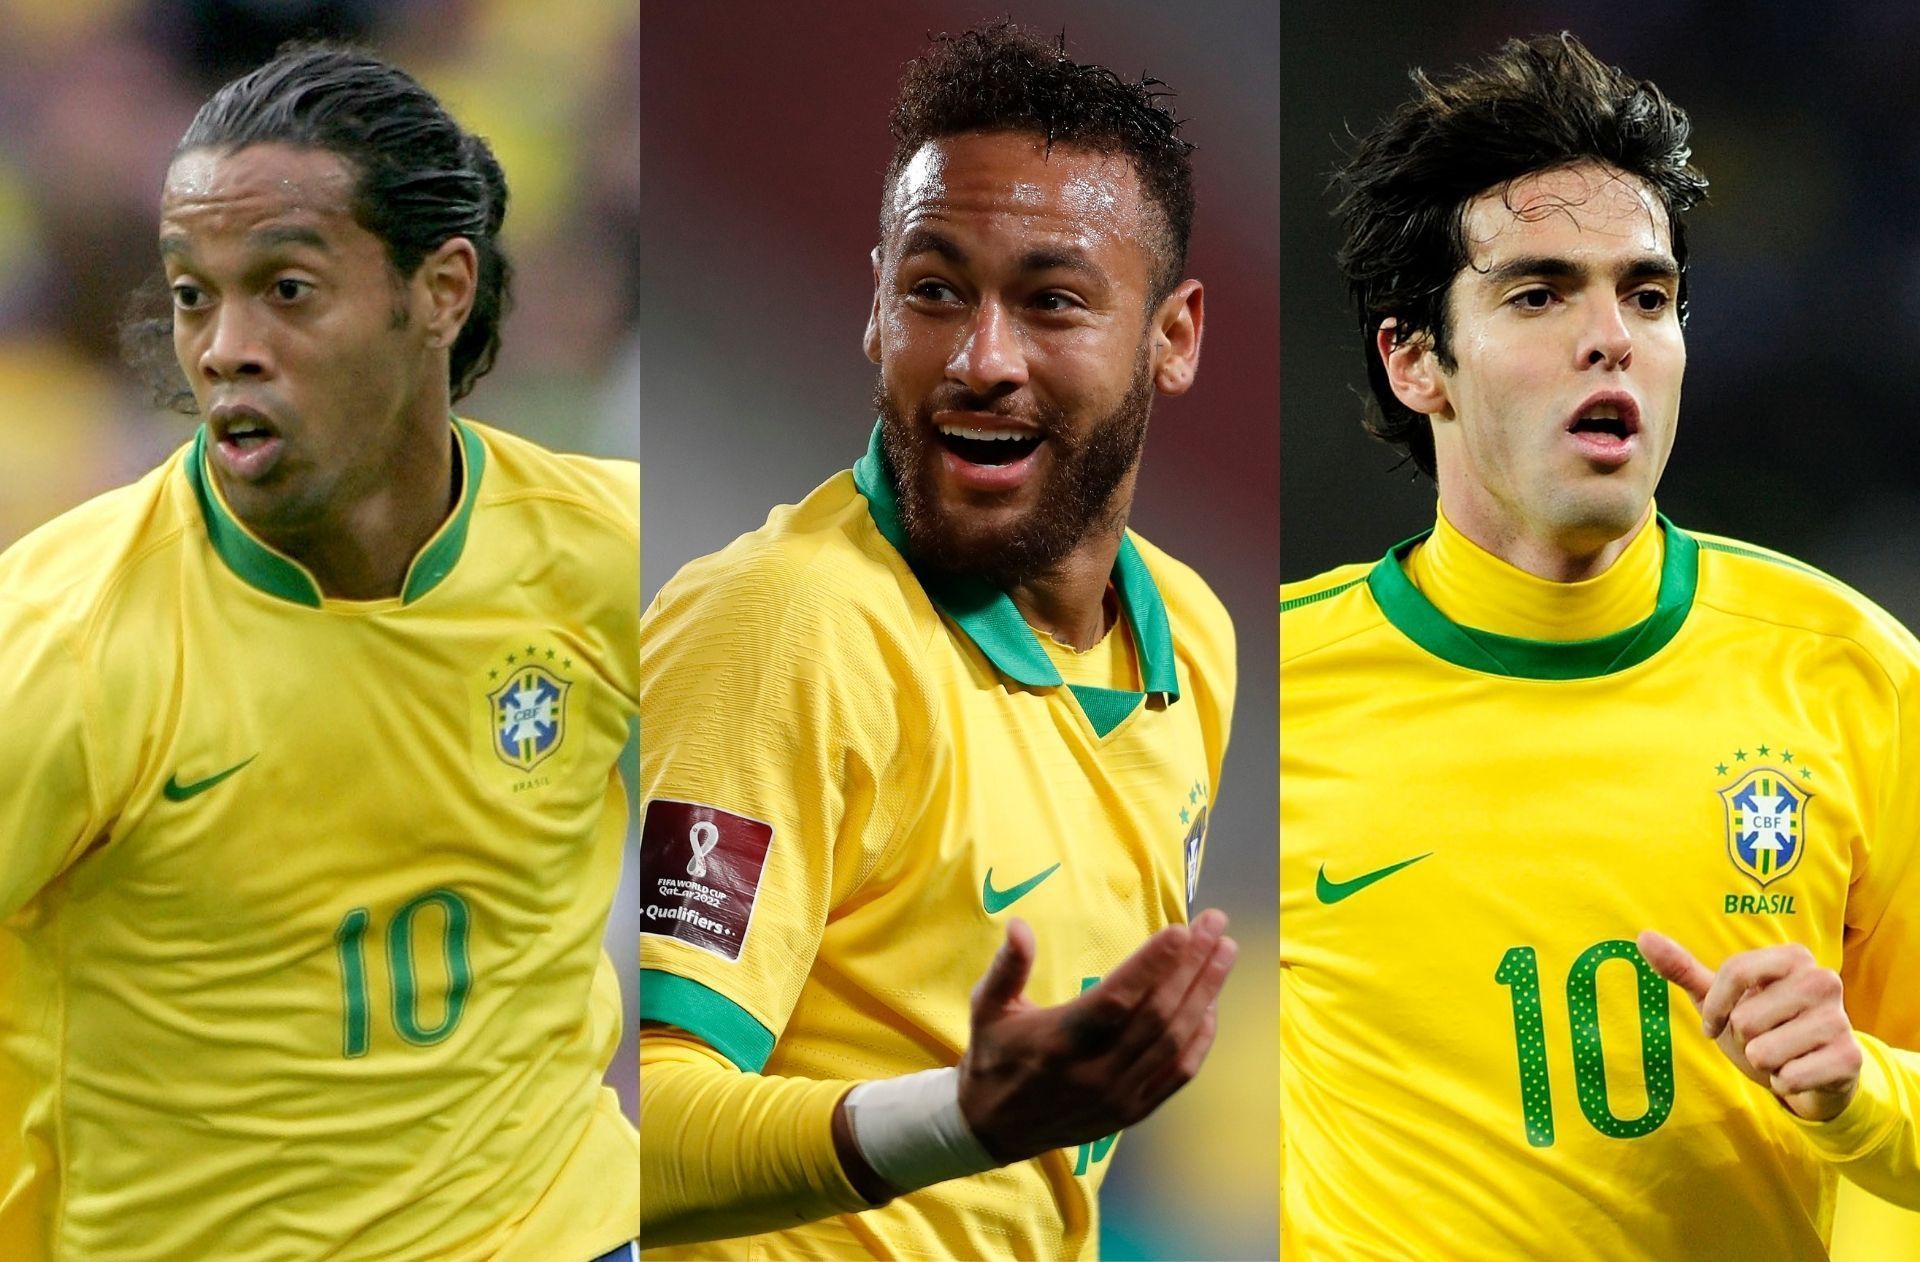 (From left to right) Ronaldinho, Neymar and Kaka are three of the best Brazilian footballers of all time.